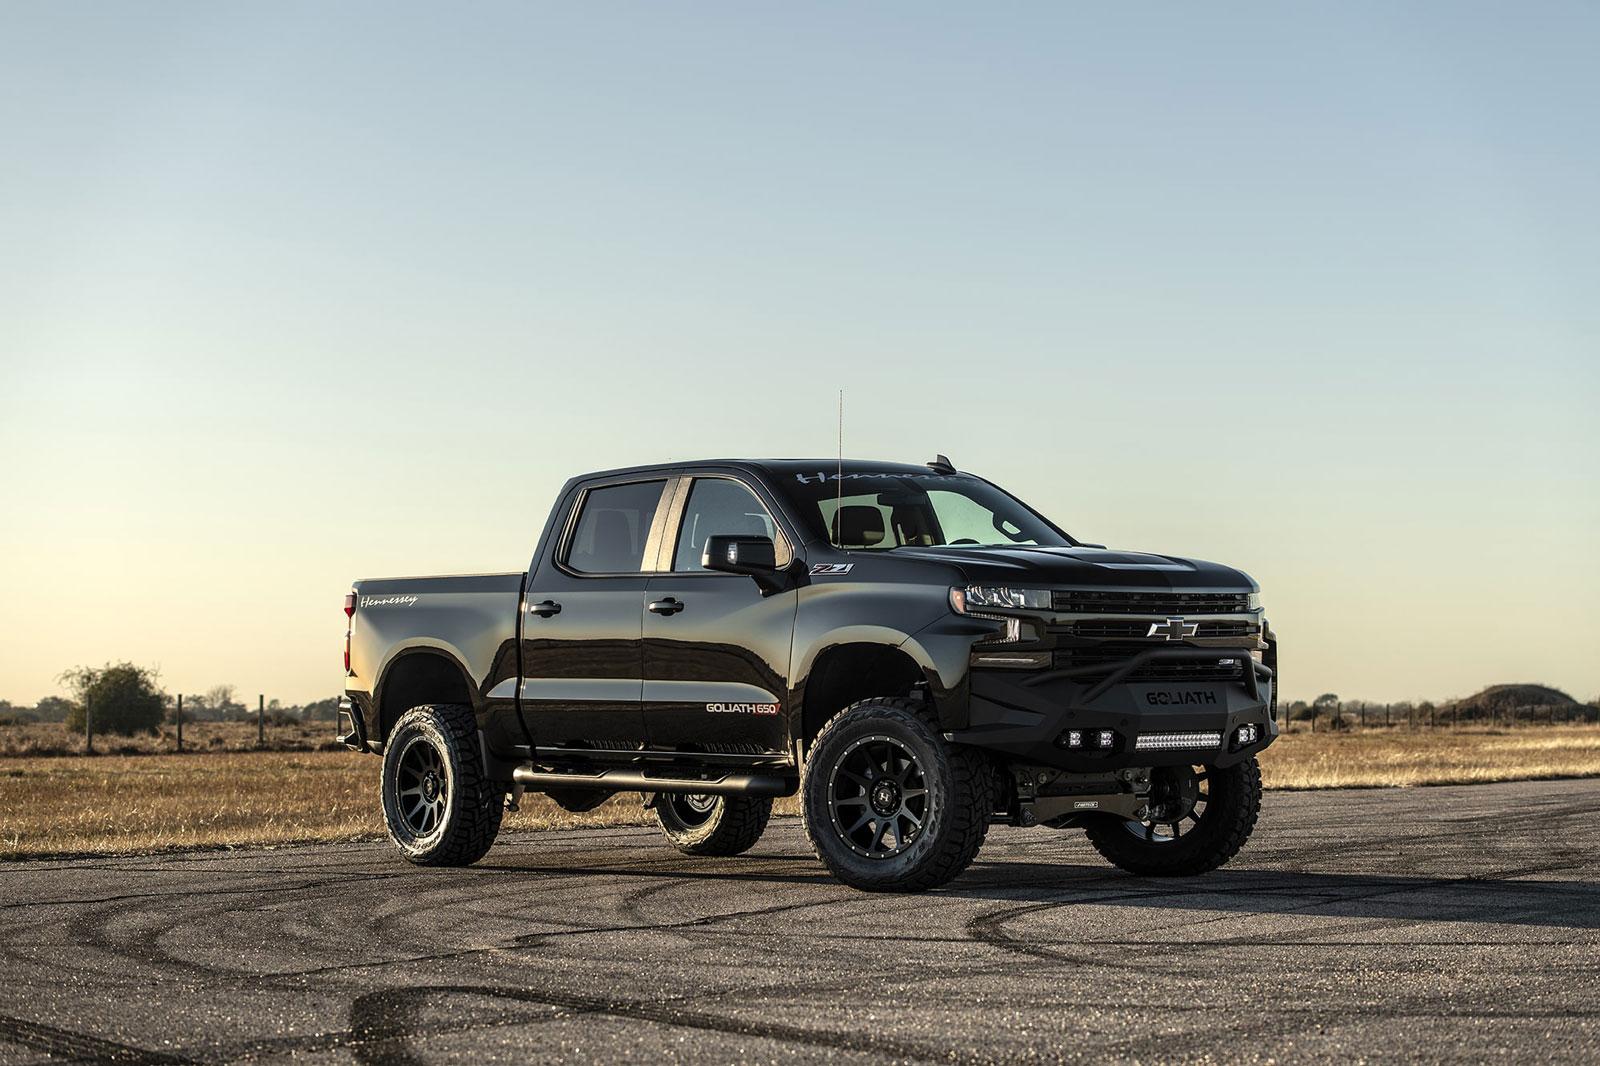 Shiny black Chevy Silverado with Hennessey Goliath  650 Supercharged upgrades, from front right